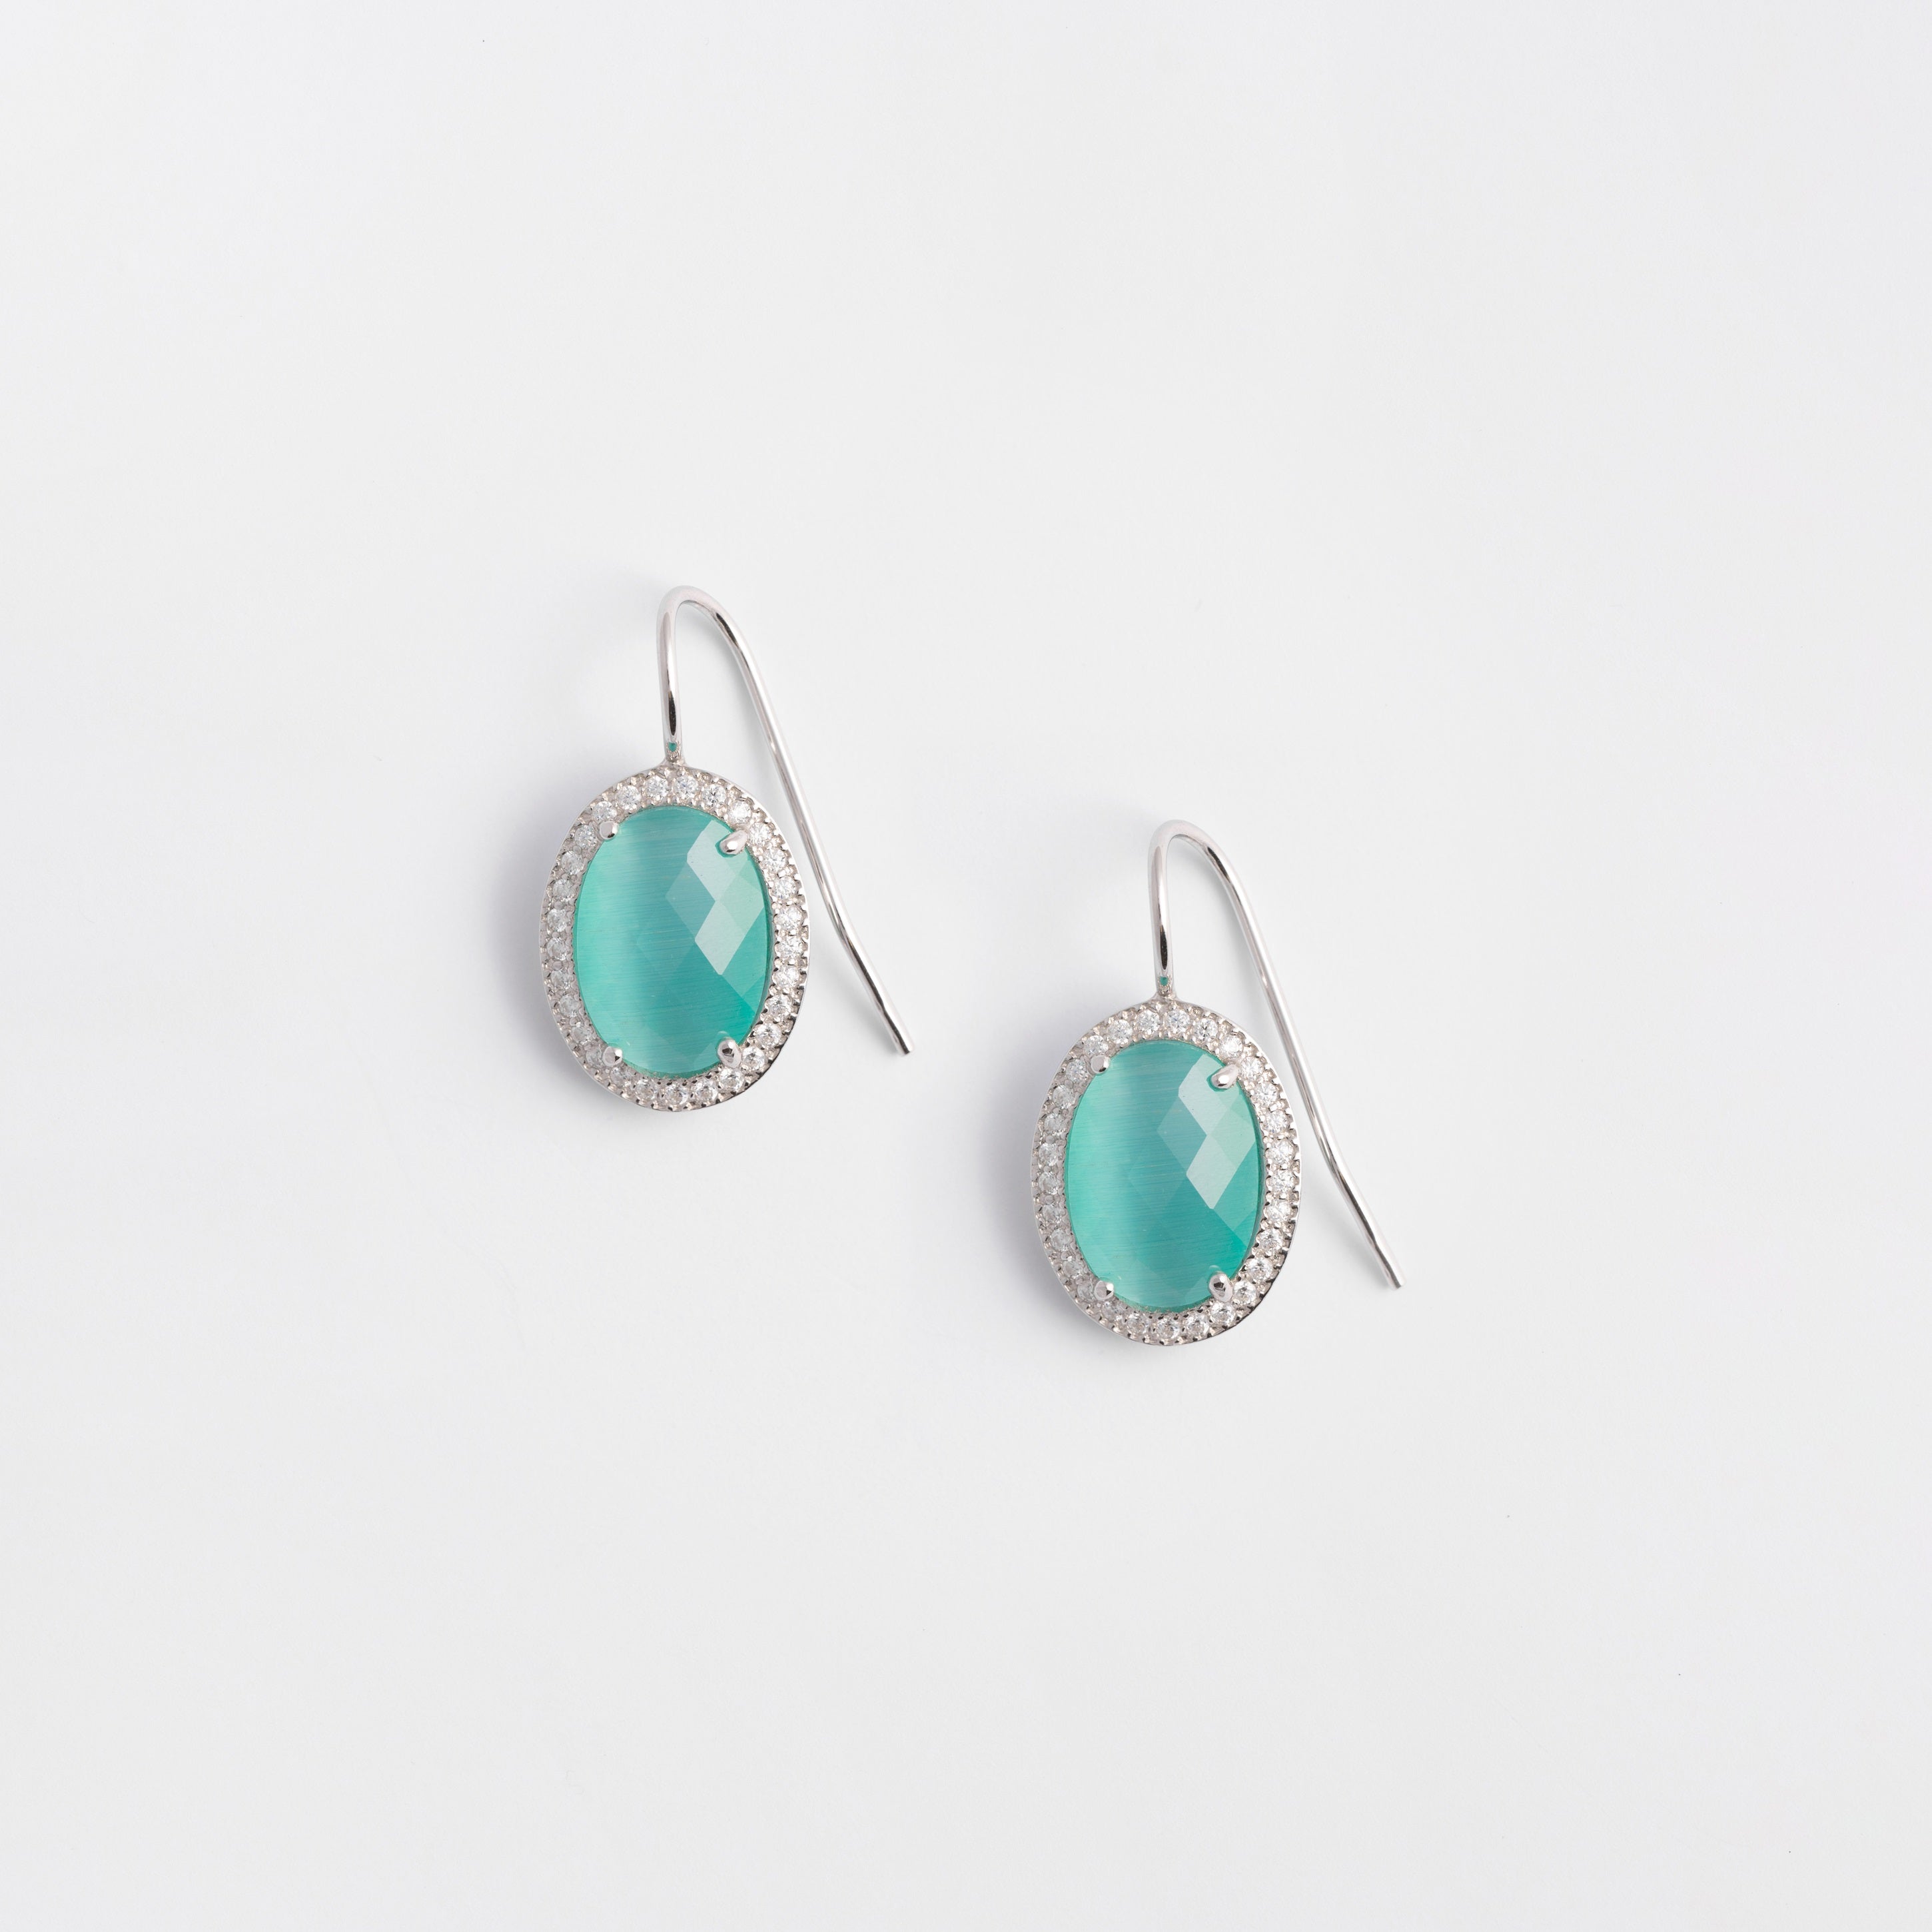 ELEGANT EARRINGS FEATURING A POLISHED OVAL STONE